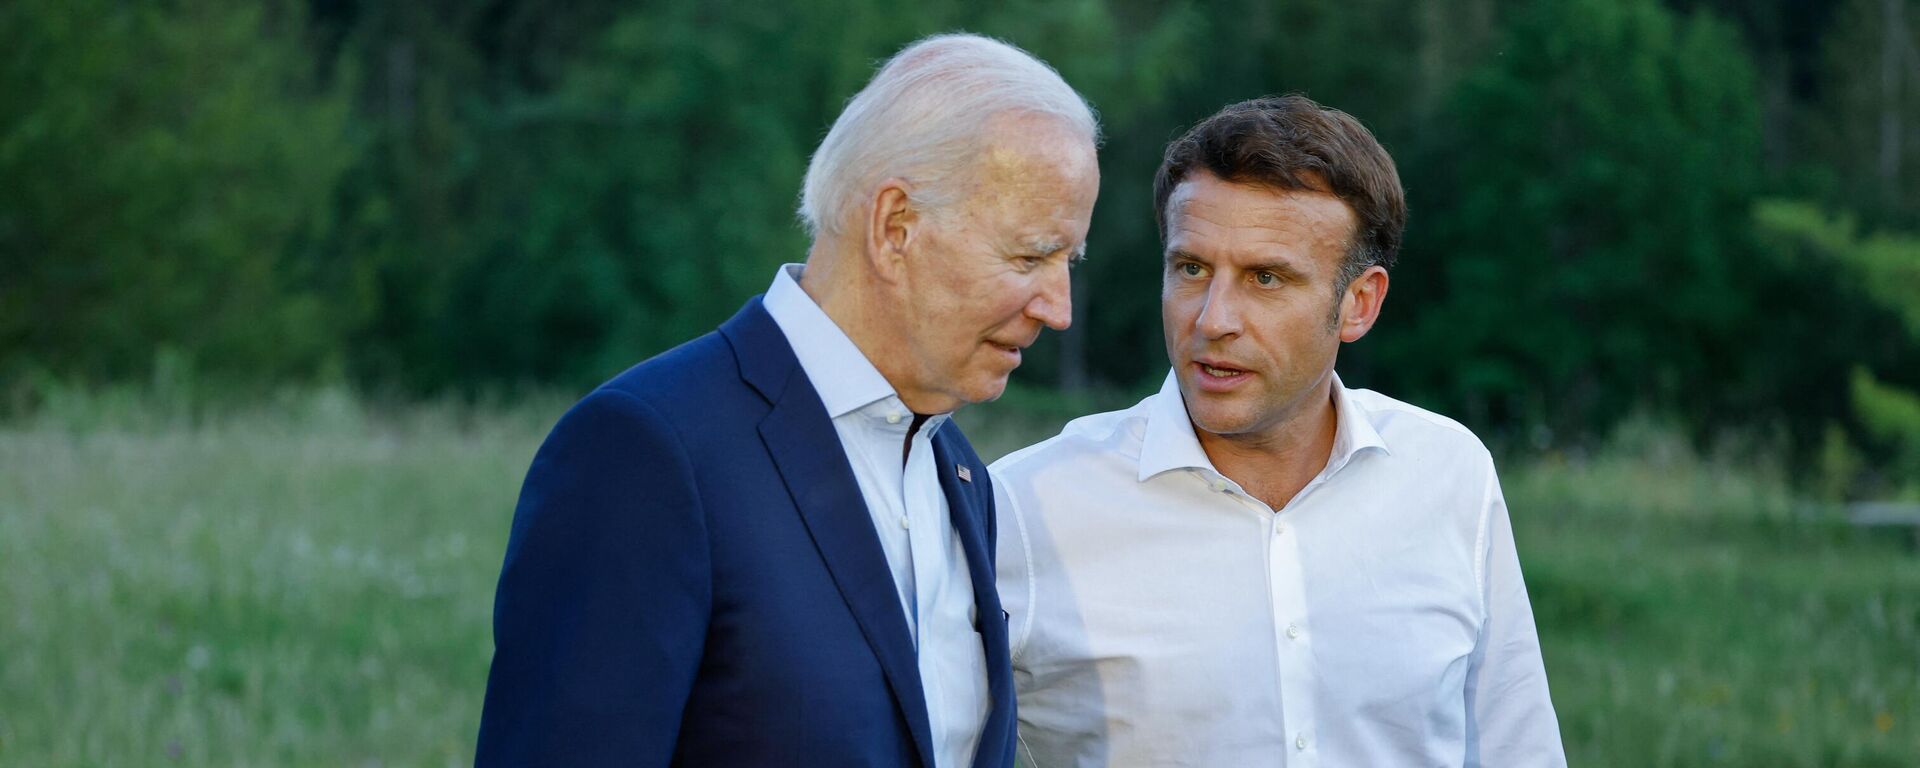 US President Joe Biden and French President Emmanuel Macron speak after posing for an informal group photo at a bench after a working dinner during the G7 Summit held at Elmau Castle, southern Germany on June 26, 2022. - Sputnik International, 1920, 29.11.2022